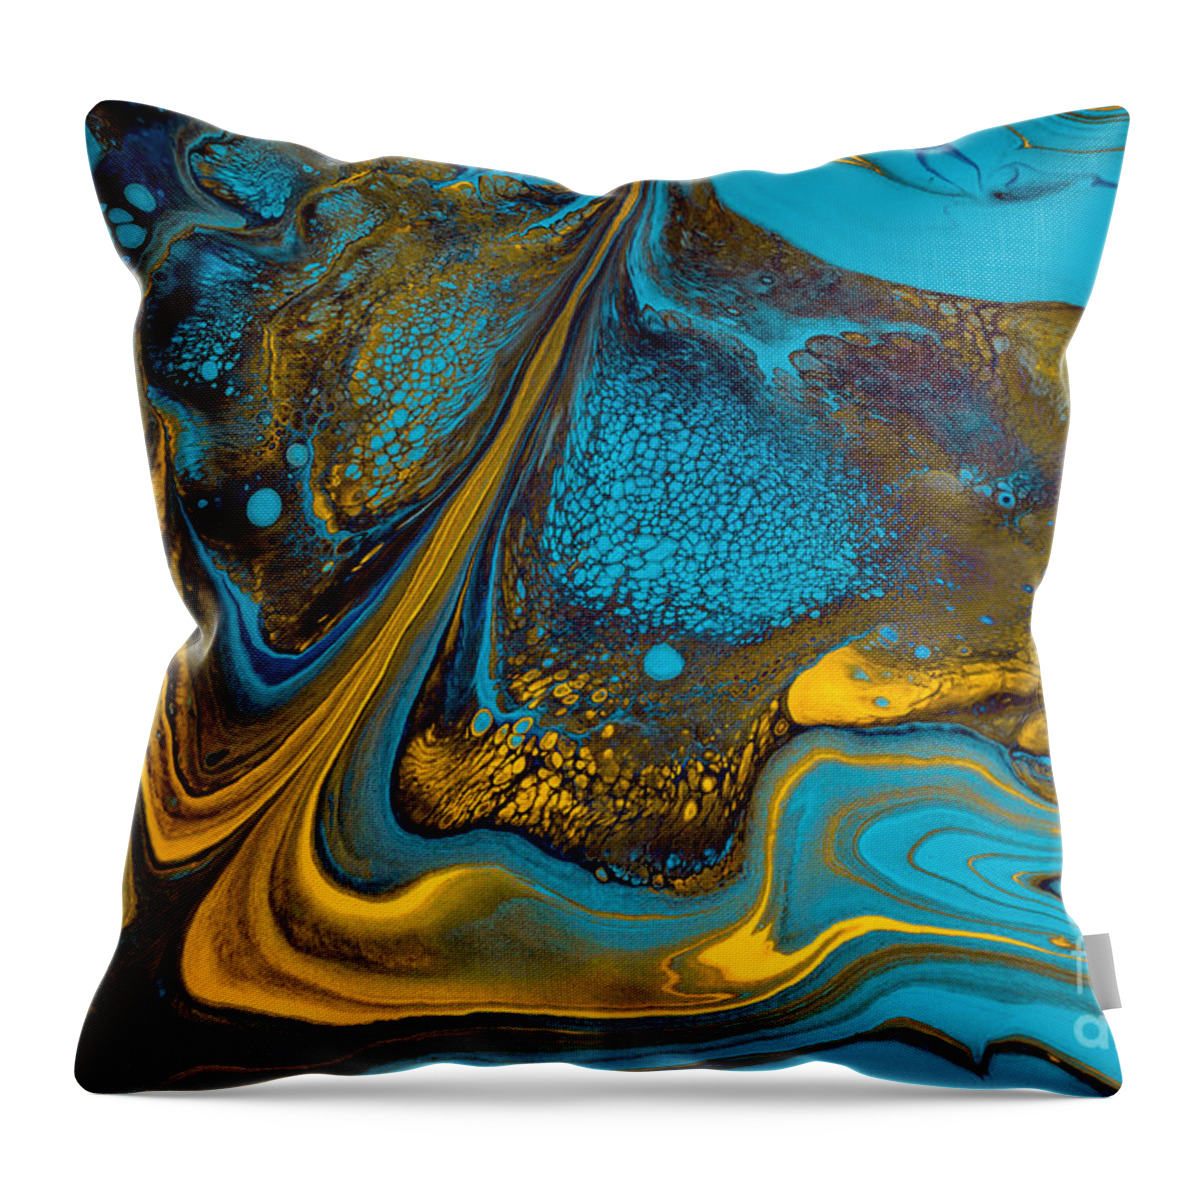 Abstract Throw Pillow featuring the painting Blue Mountain by Patti Schulze